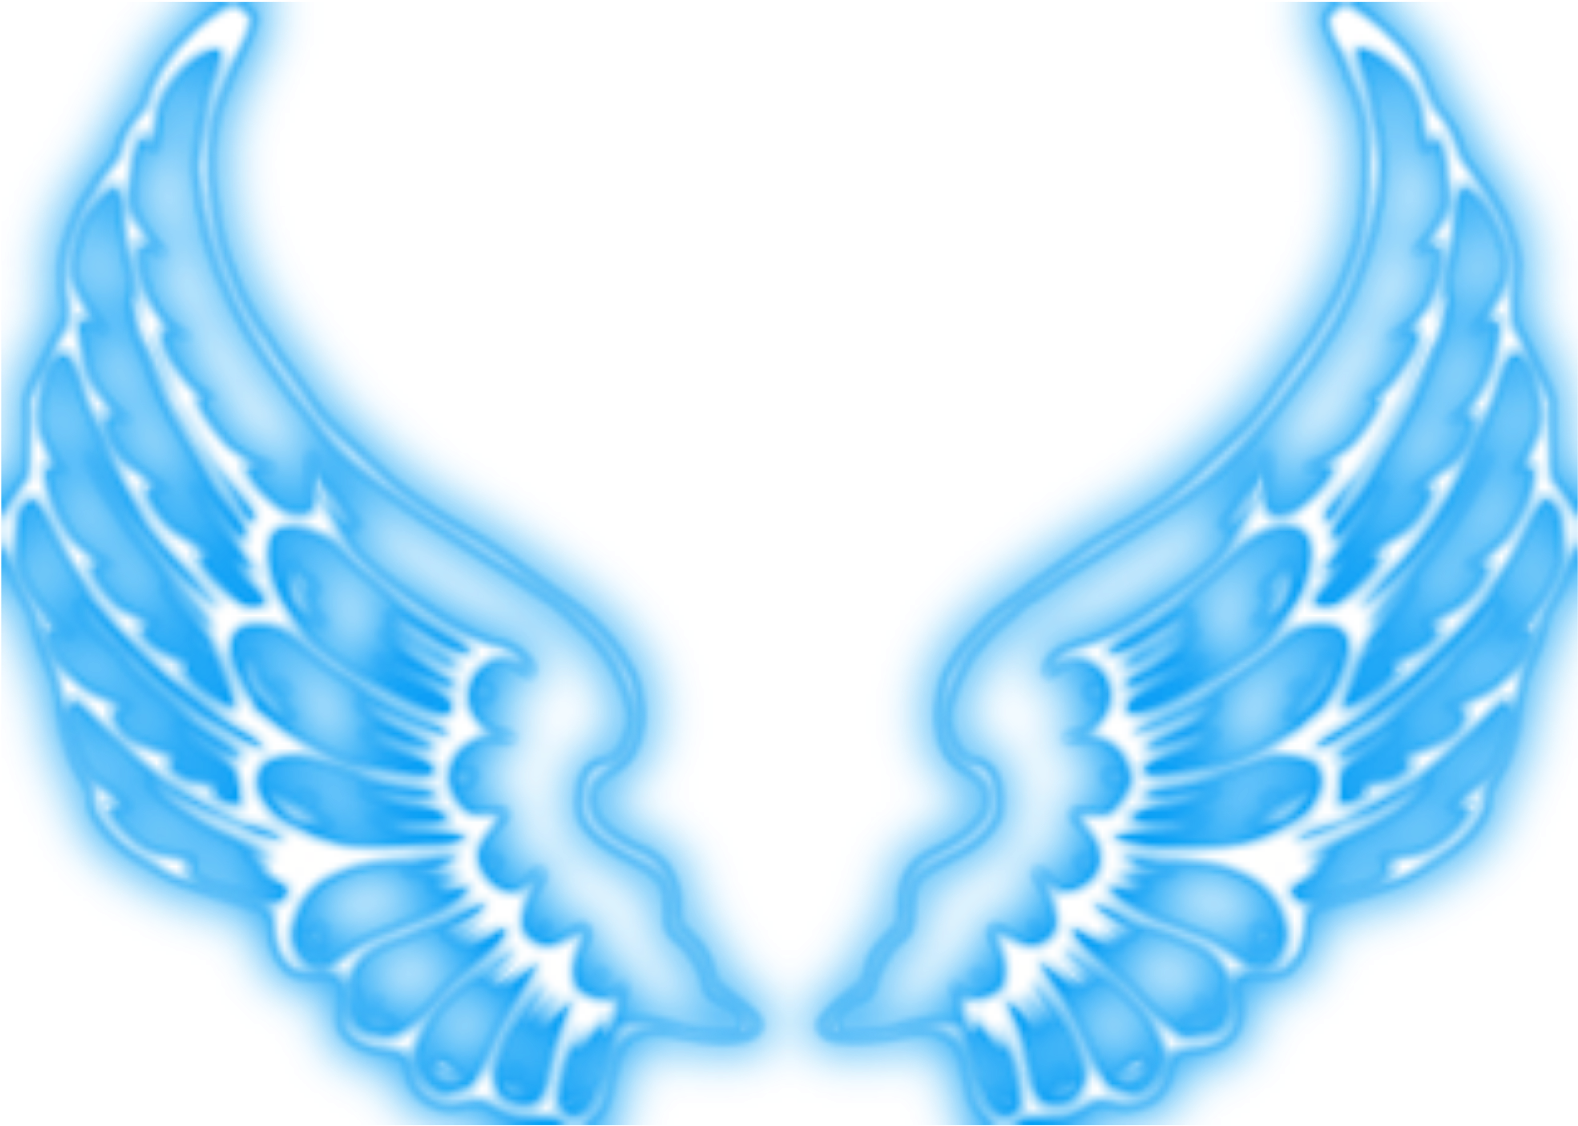 Download Sticker Neon Wings Alas Tumblr Png Wings Tumblr Asas De Anjo Azul Png Png Image With No Background Pngkey Com